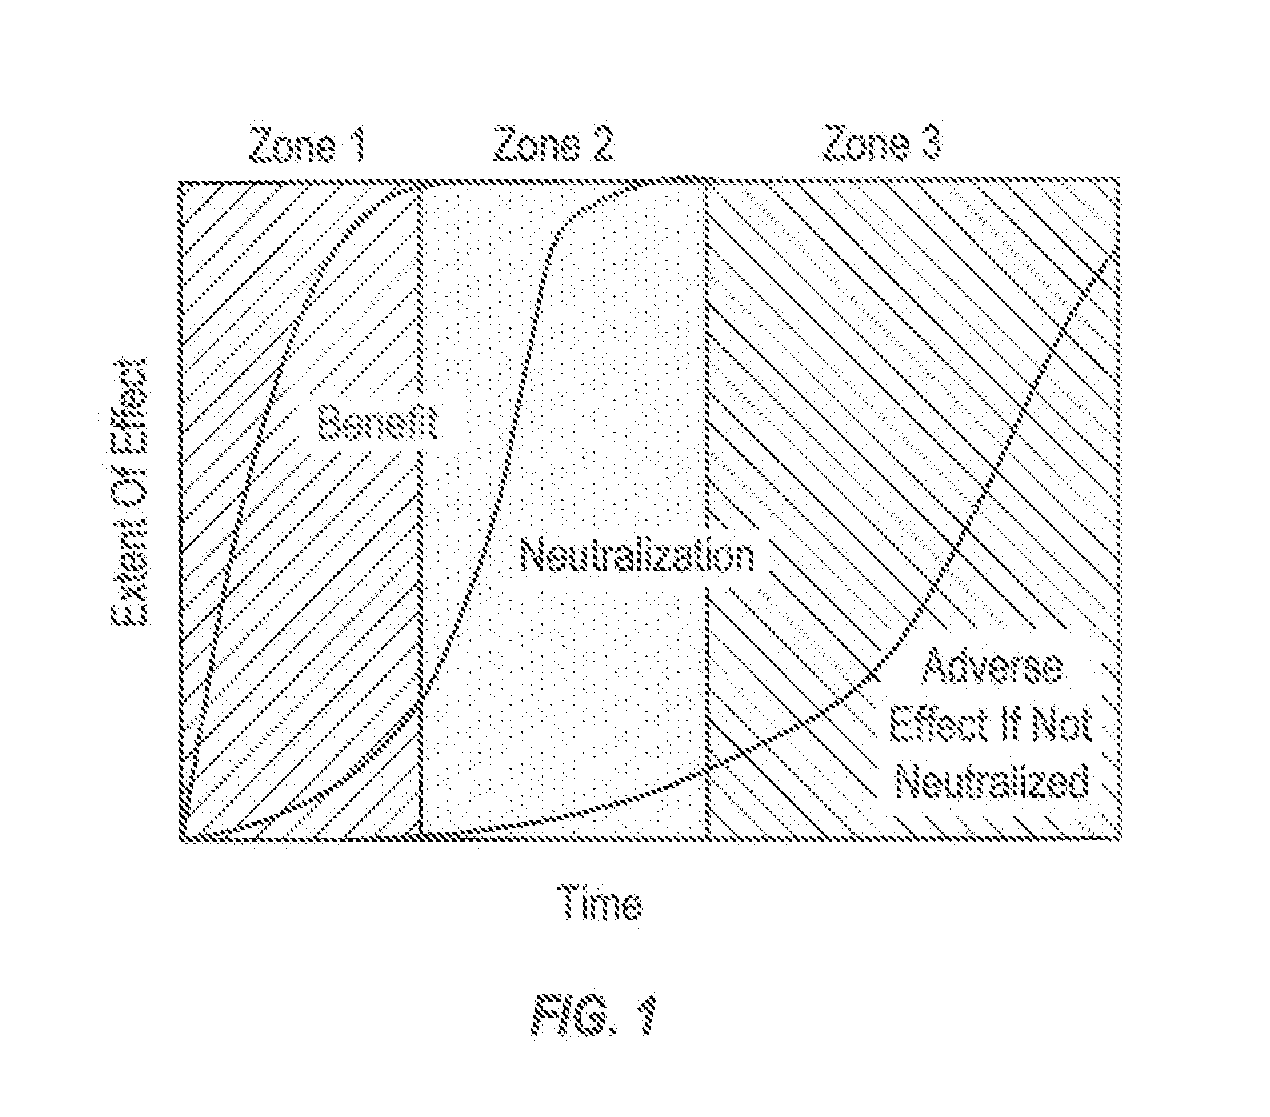 Targeted performance of hypohalite methods thereof